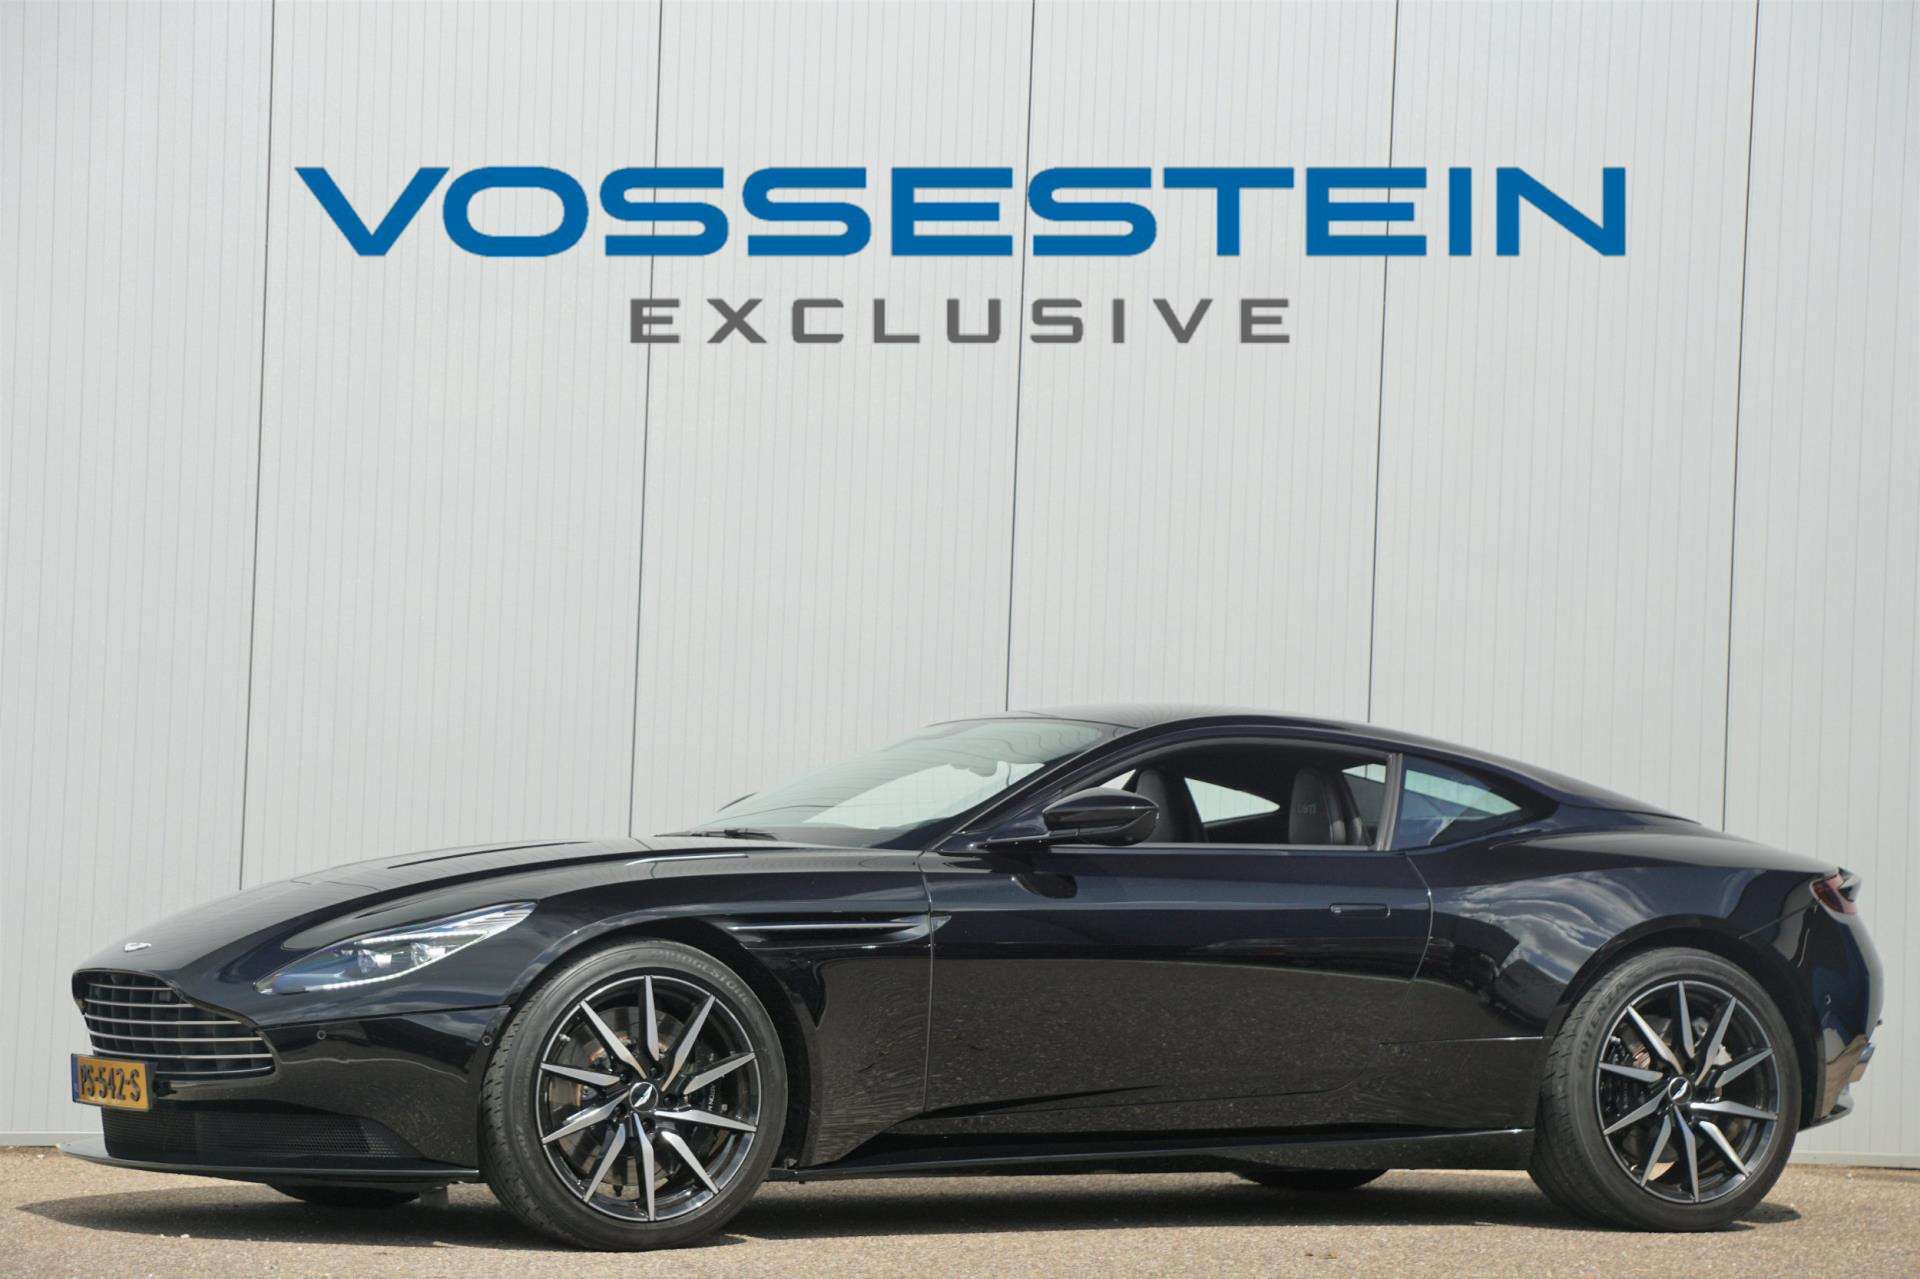 Aston Martin DB11 Coupe in Black used in NIEUWER TER AA (BREUKELEN) for € 162,500.-